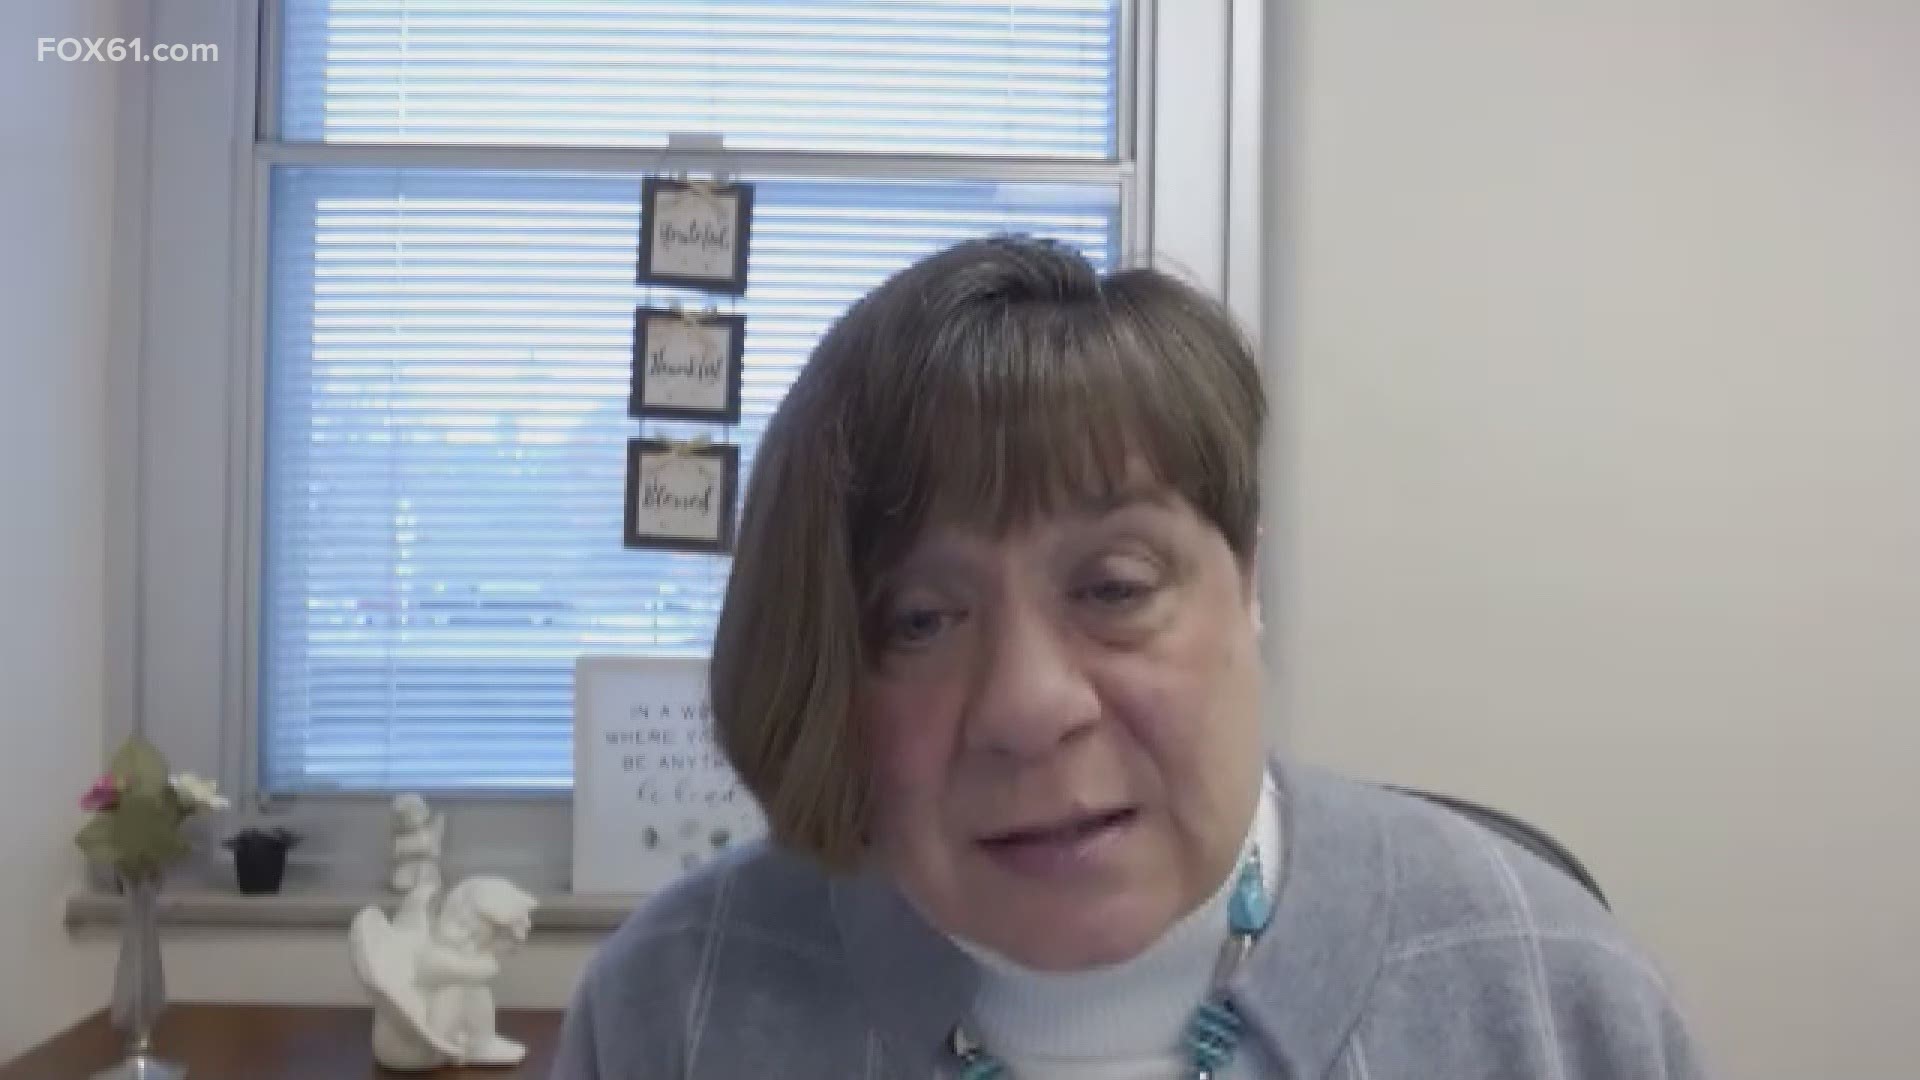 2020 has been an incredibly challenging time for so many people. Judy Bellemare, of St. Mary's discusses spiritual health as part of the 61 Day Challenge.